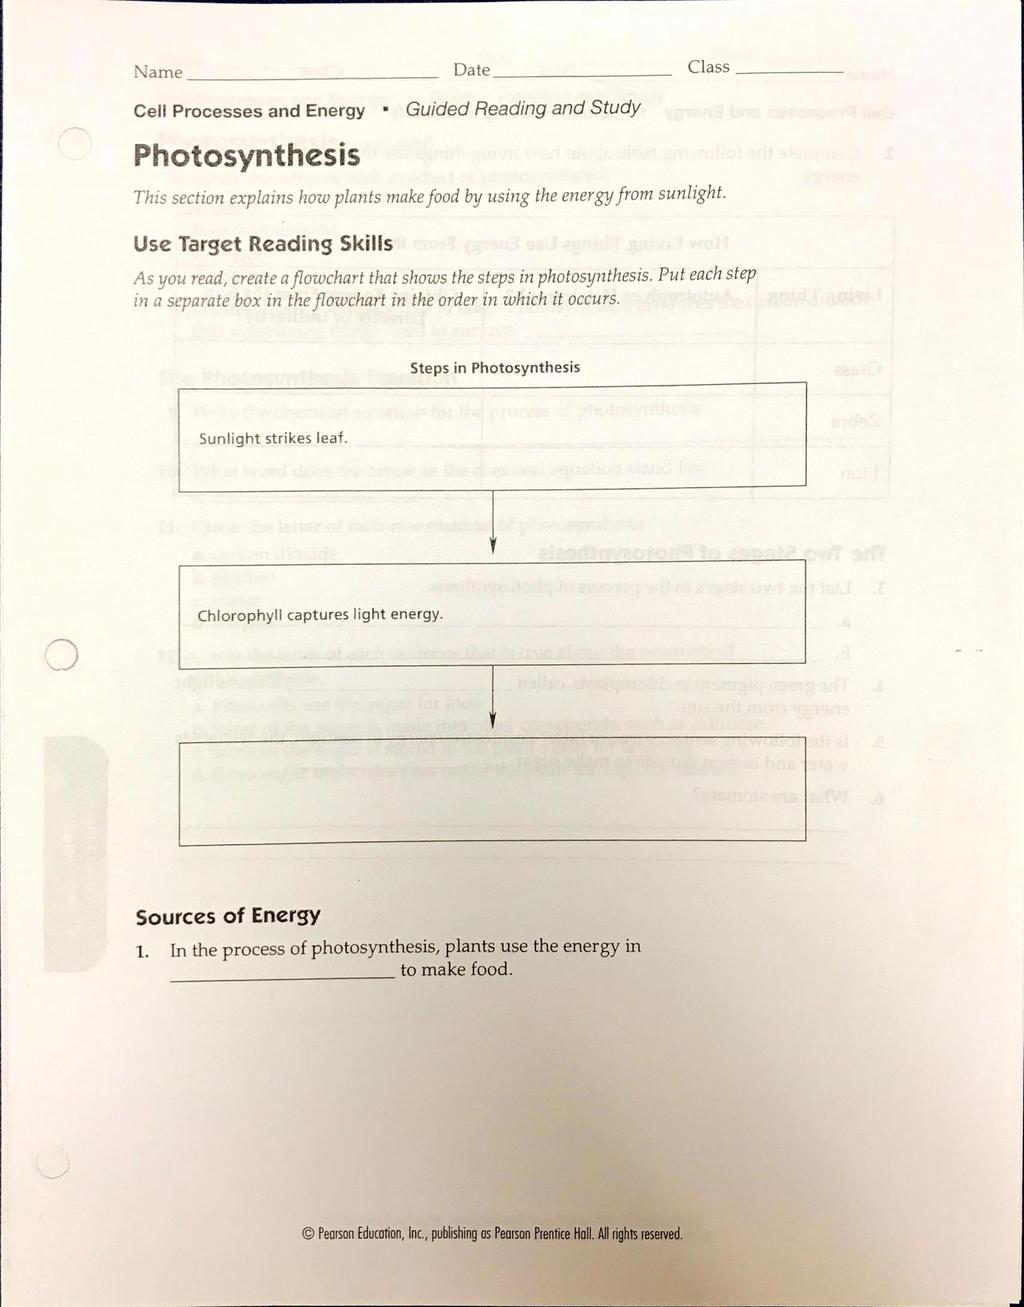 Cell Processes and Energy Photosynthesis Guided Reading and Study This section explains how plants make food by using the energy from sunlight.